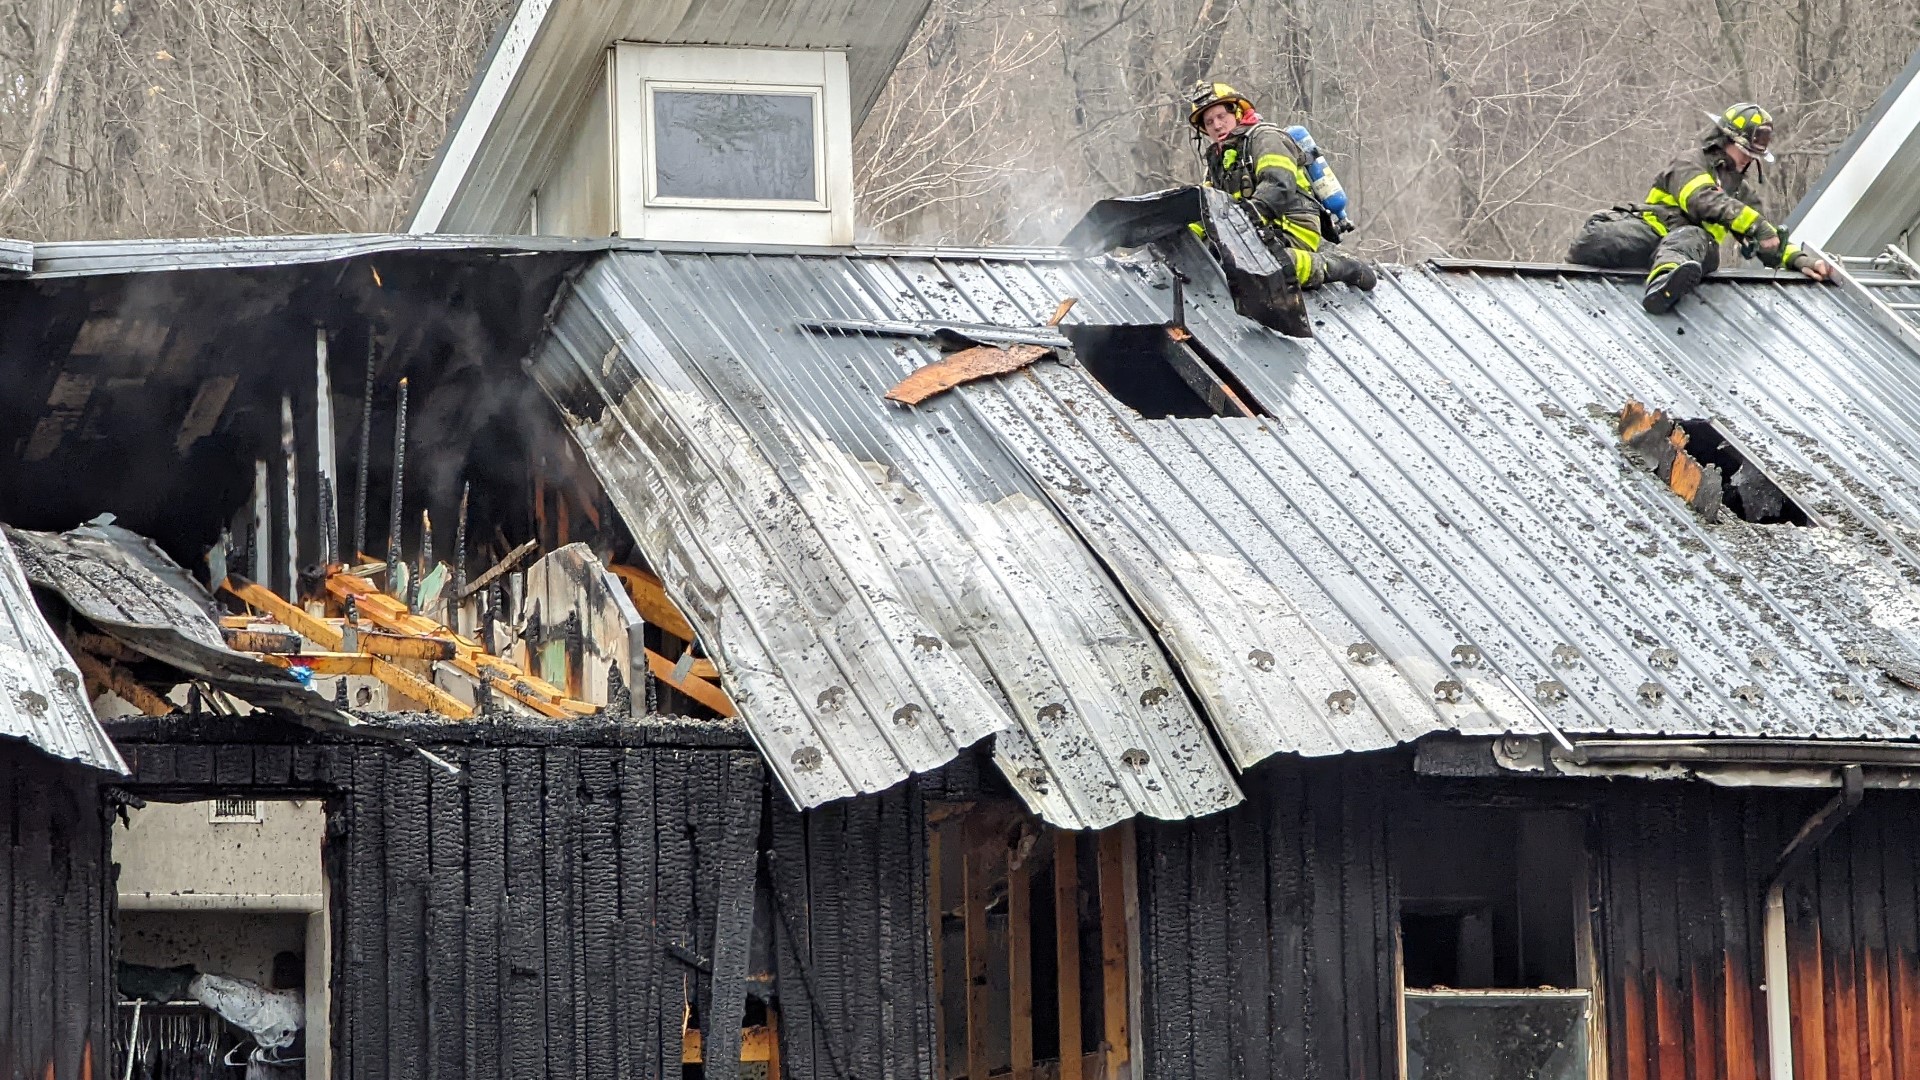 As a result of the Thursday morning fire, eight people have been displaced and are receiving assistance from the Red Cross.